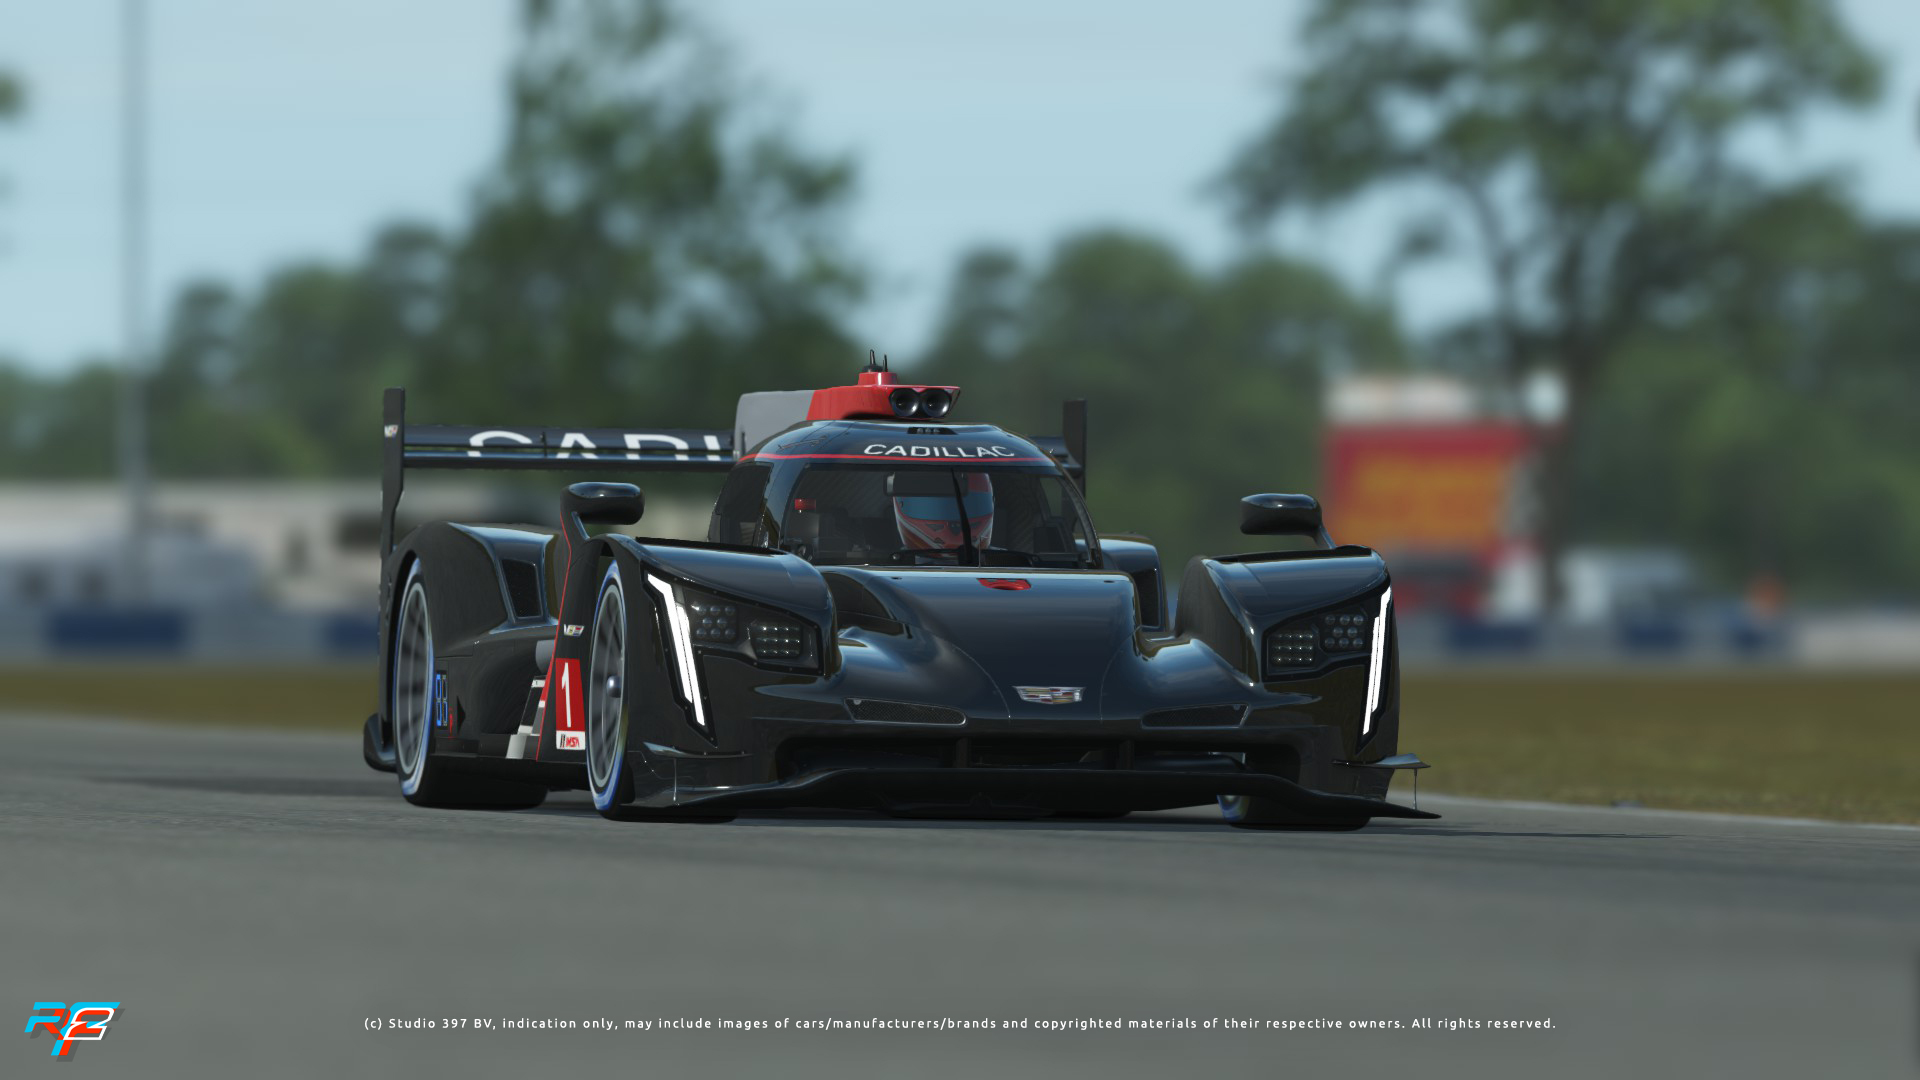 rFactor 2 on Twitter: "Heads up folks... we've already confirmed the  Cadillac DPi-V.R and the Corvette C8.R are coming to rFactor 2... how about  a third car, sound good 💪 Stay tuned